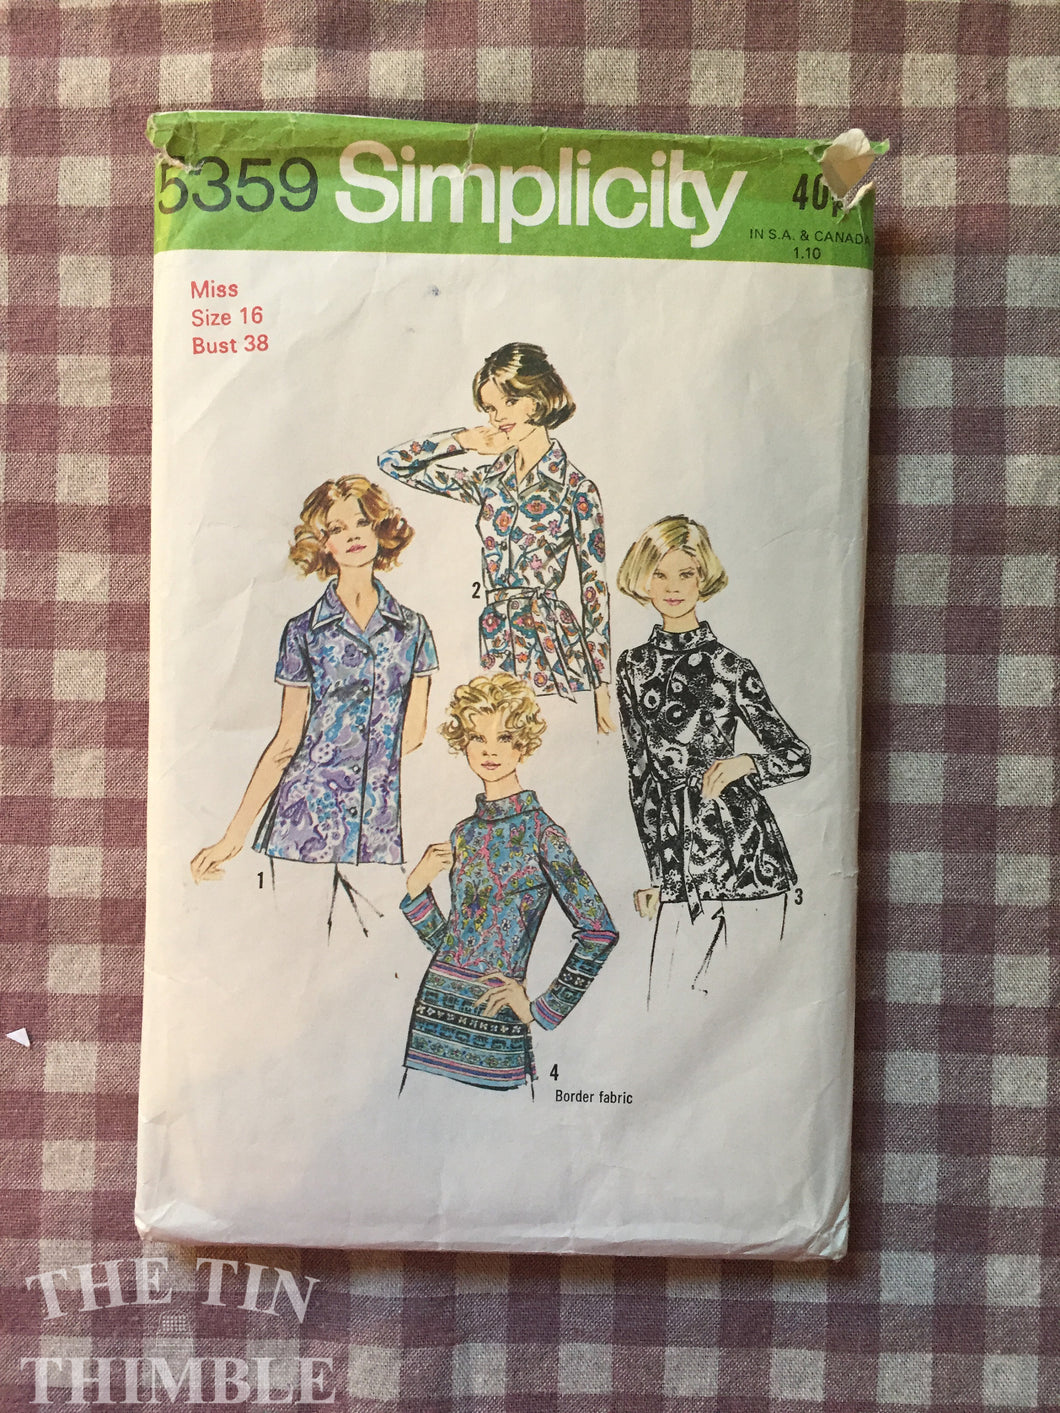 Vintage Sewing Pattern / 1970s Blouse Pattern / Simplicity 5359 / Size 16 Bust 38 - Bias Roll Collar / 1970 Fashion / Border Print Blouse